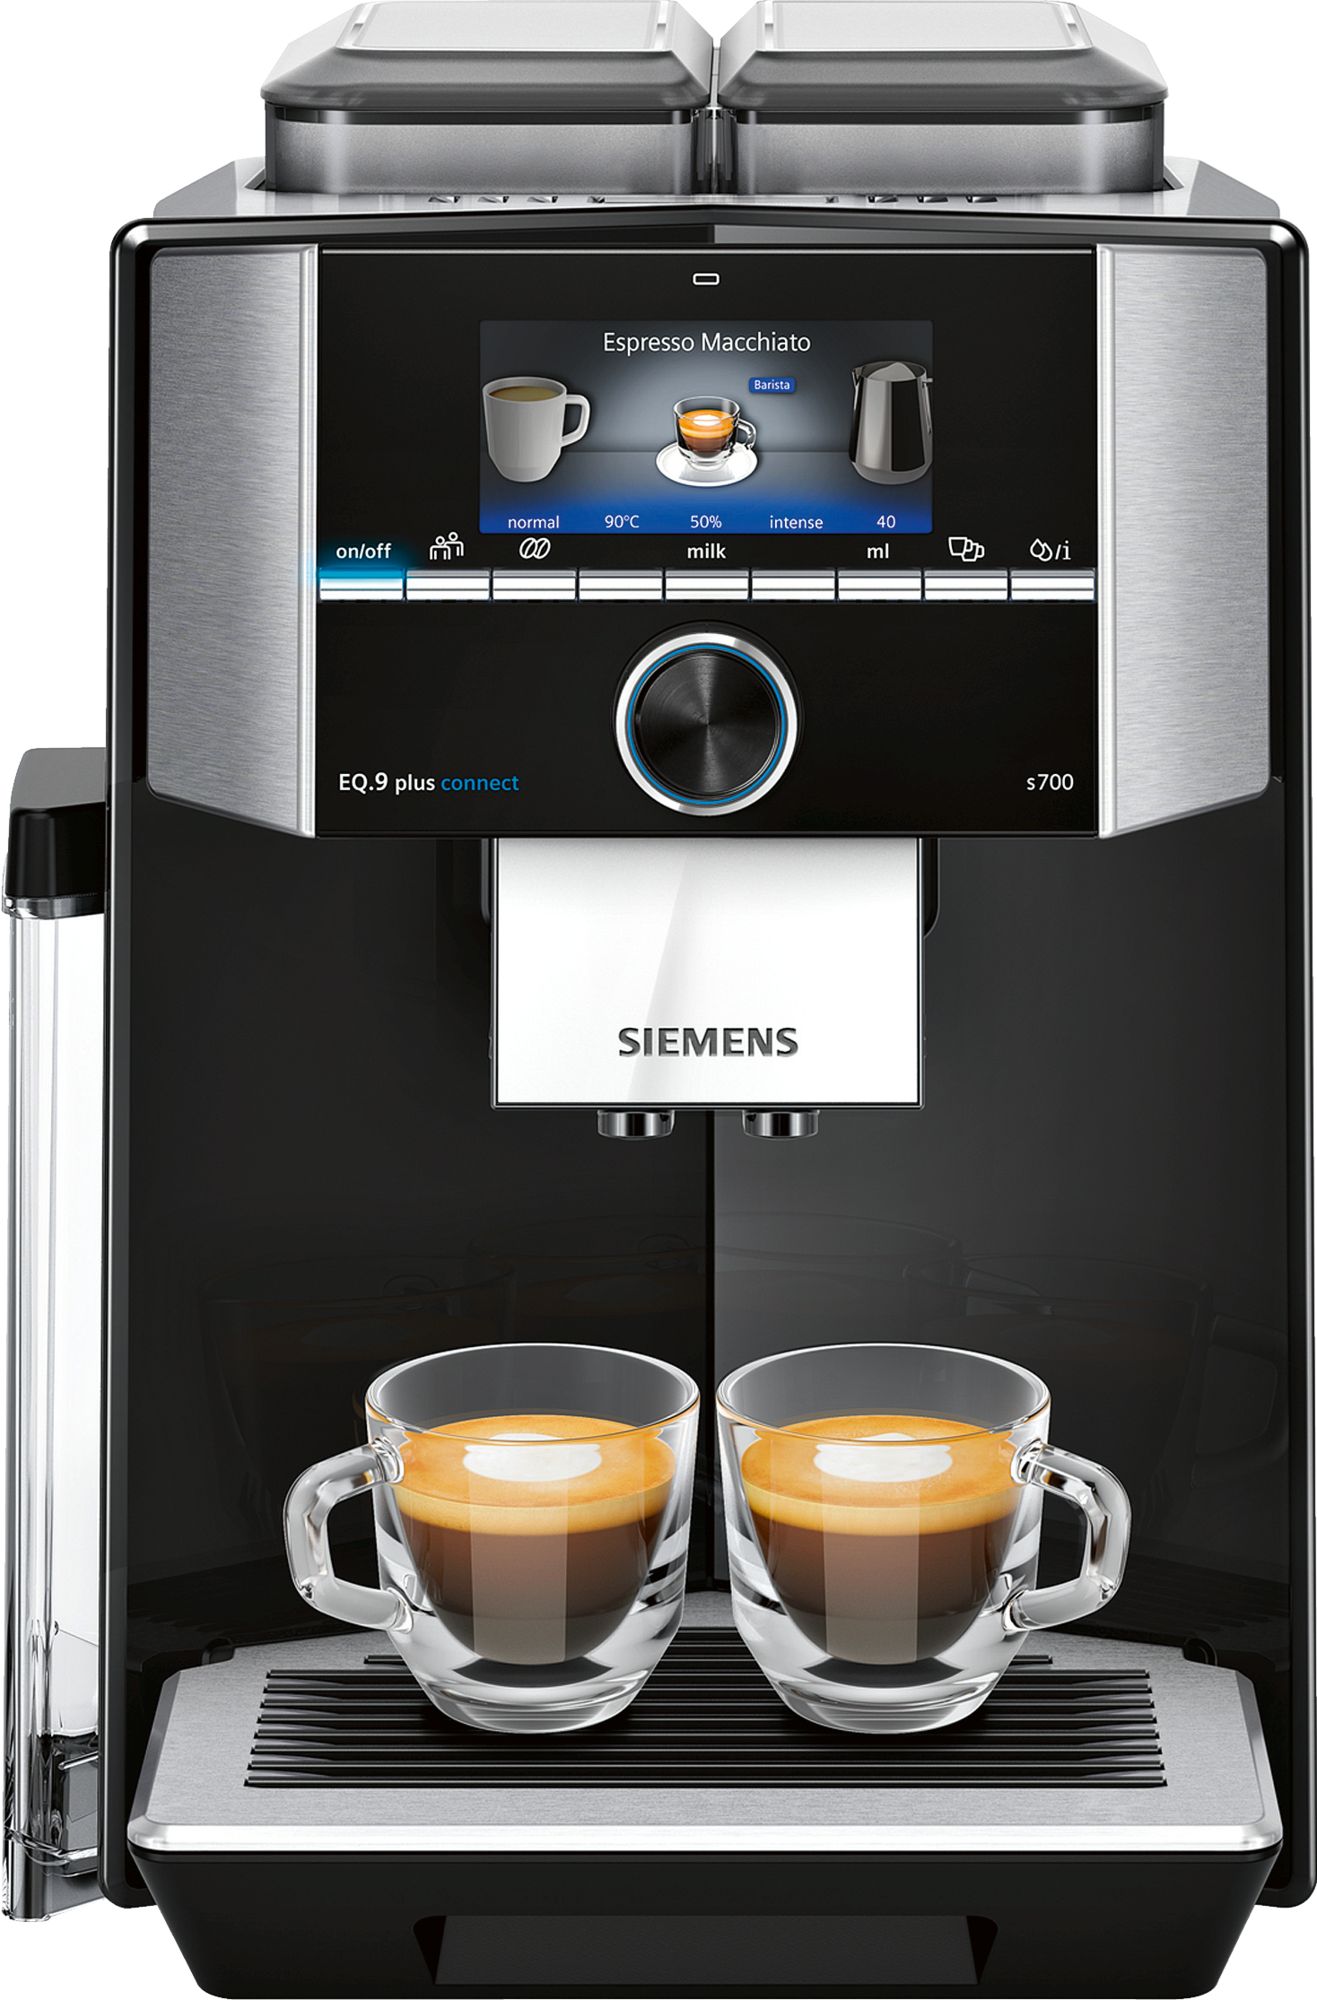 Fully automatic coffee machine EQ.9 plus connect s700 siyah